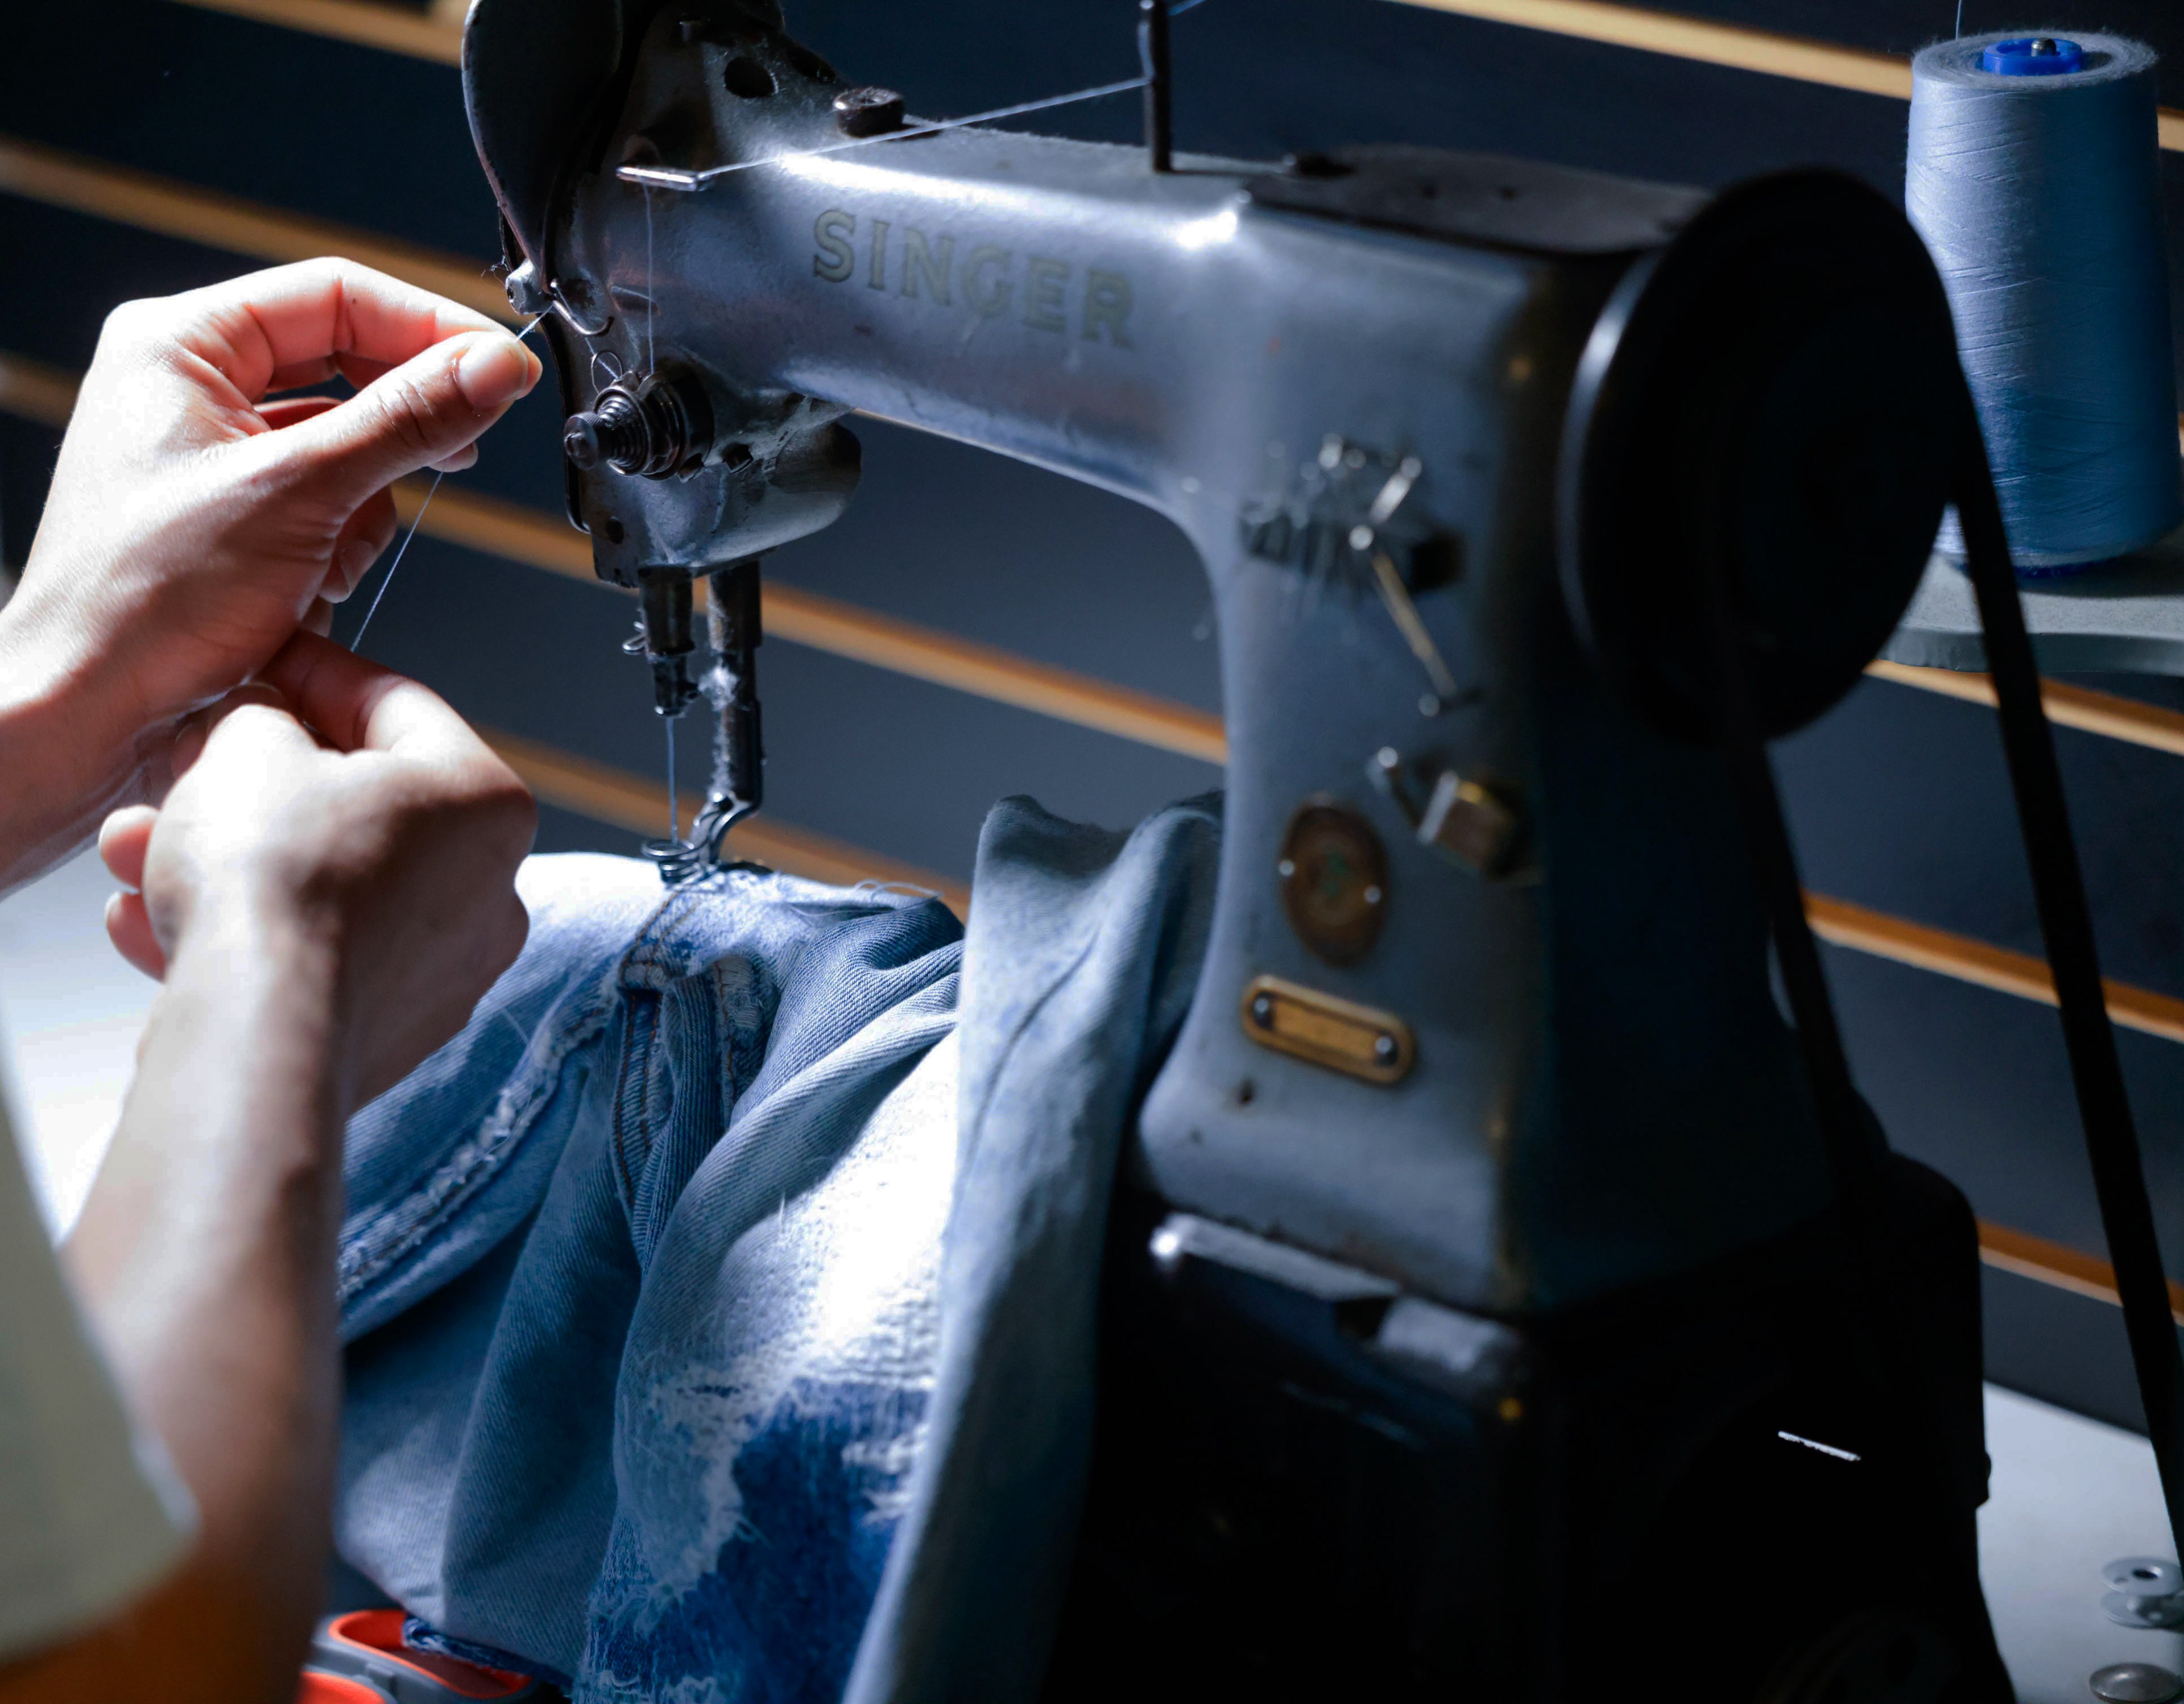 Hands threading a needle on a vintage Singer sewing machine with denim and blue thread spool.